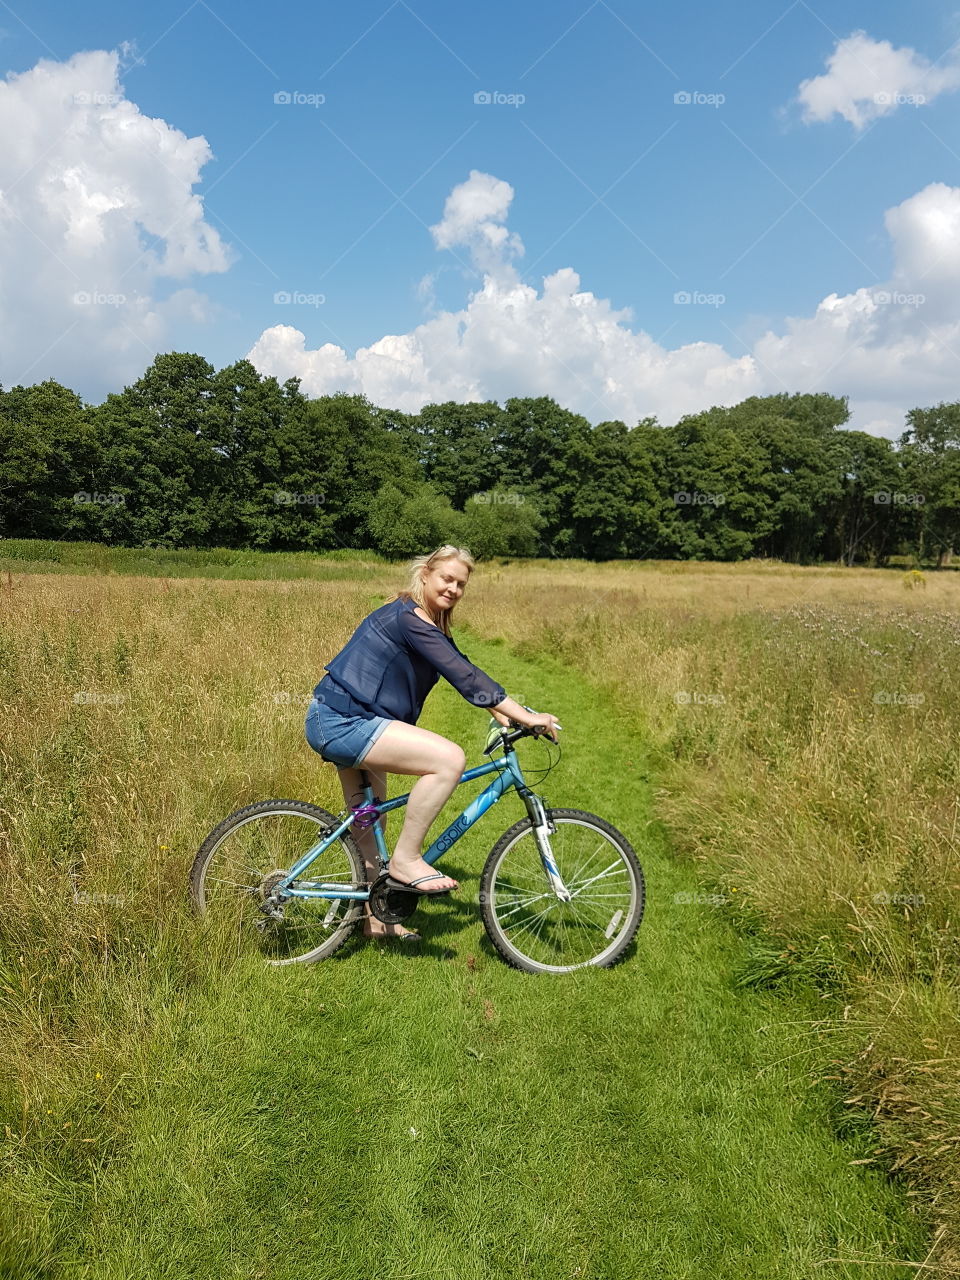 Young woman on bicycle in grassy field